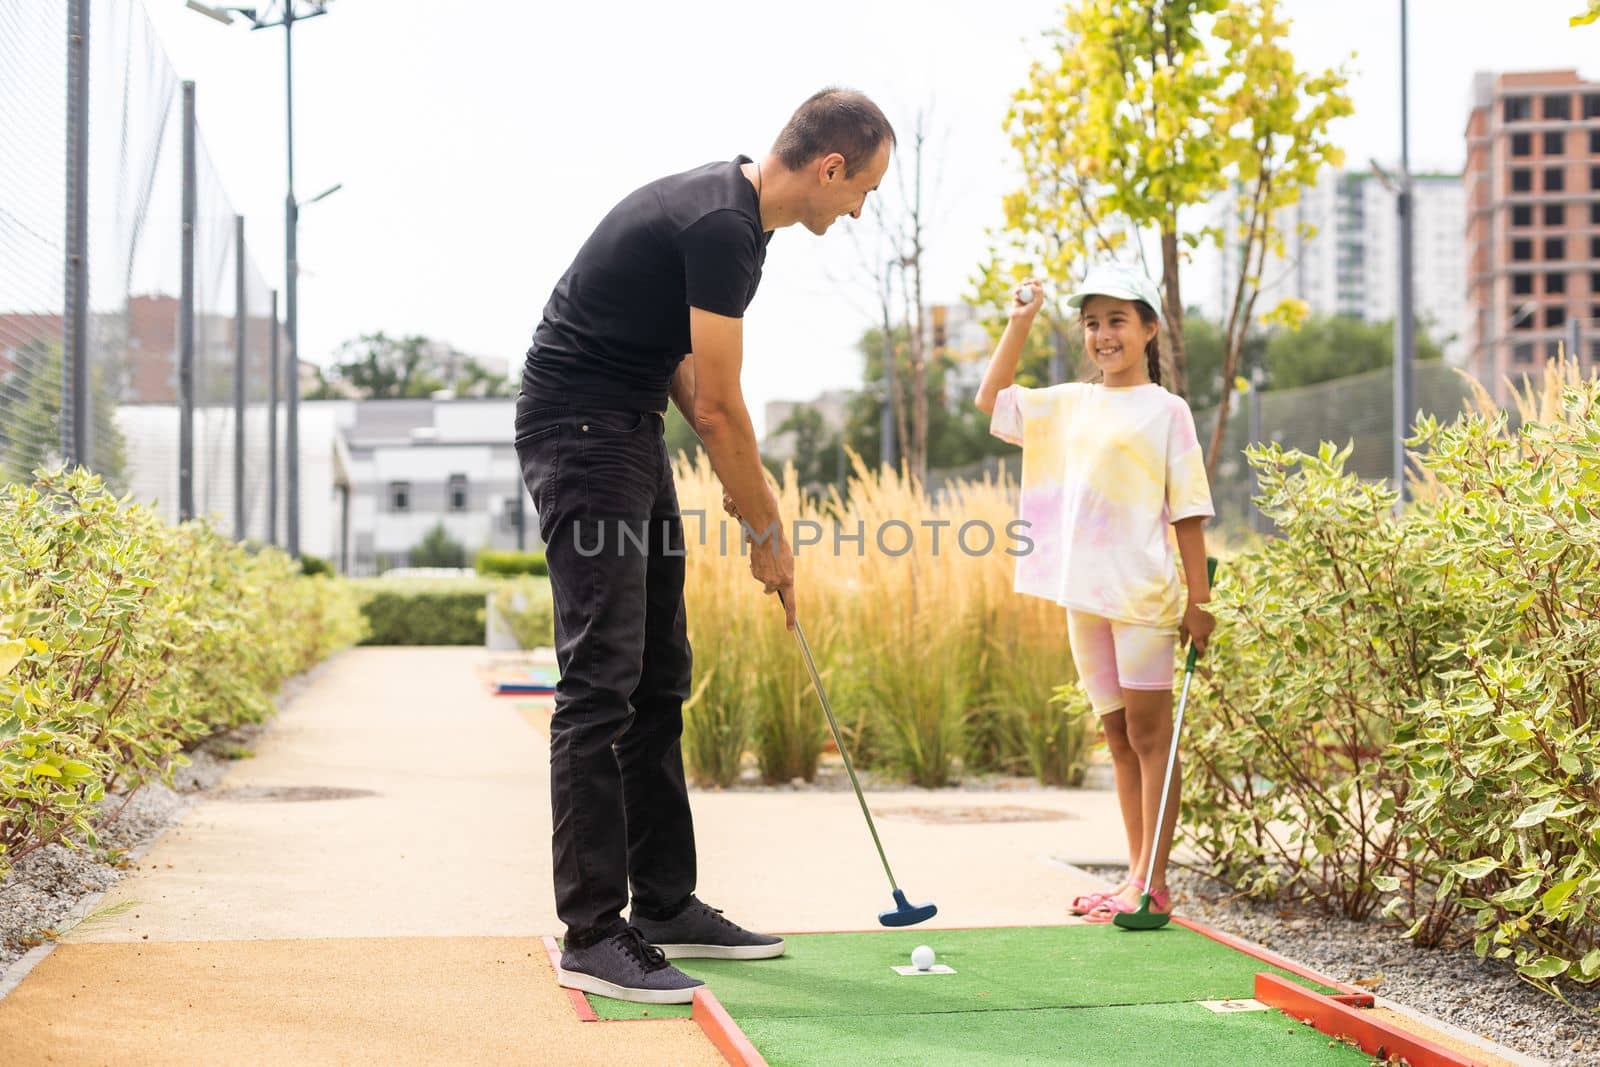 Family playing miniature golf outdoors by Andelov13